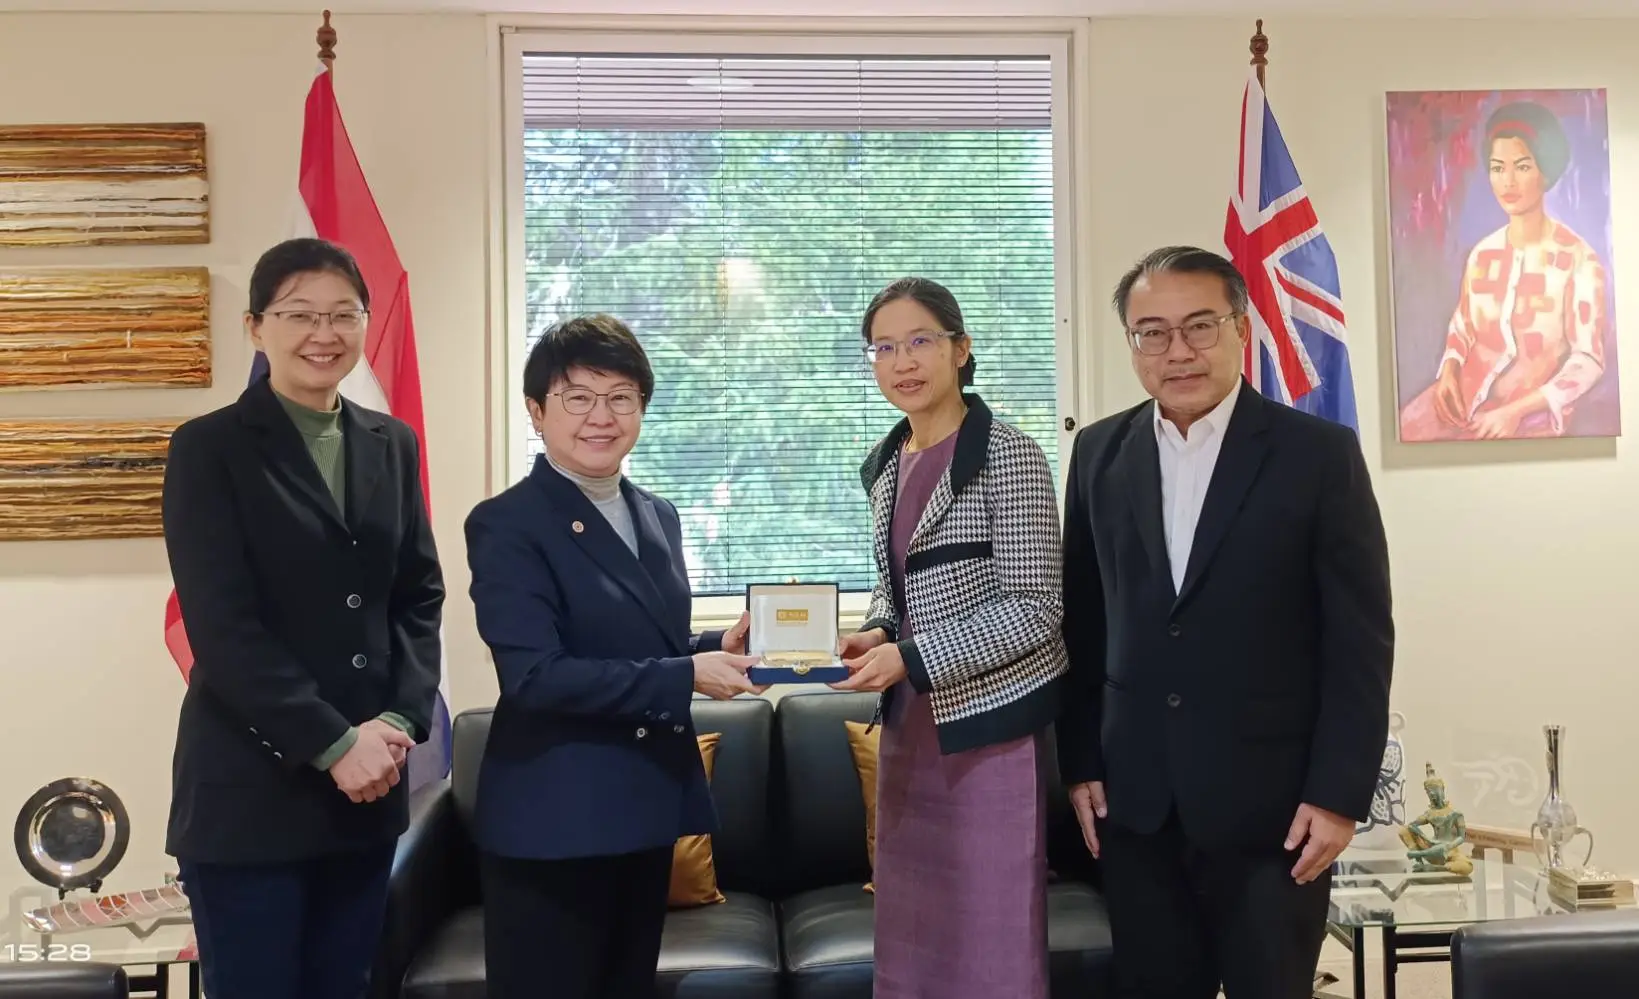 NIDA President and Vice President Meet with Thai Ambassador in Canberra, Australia